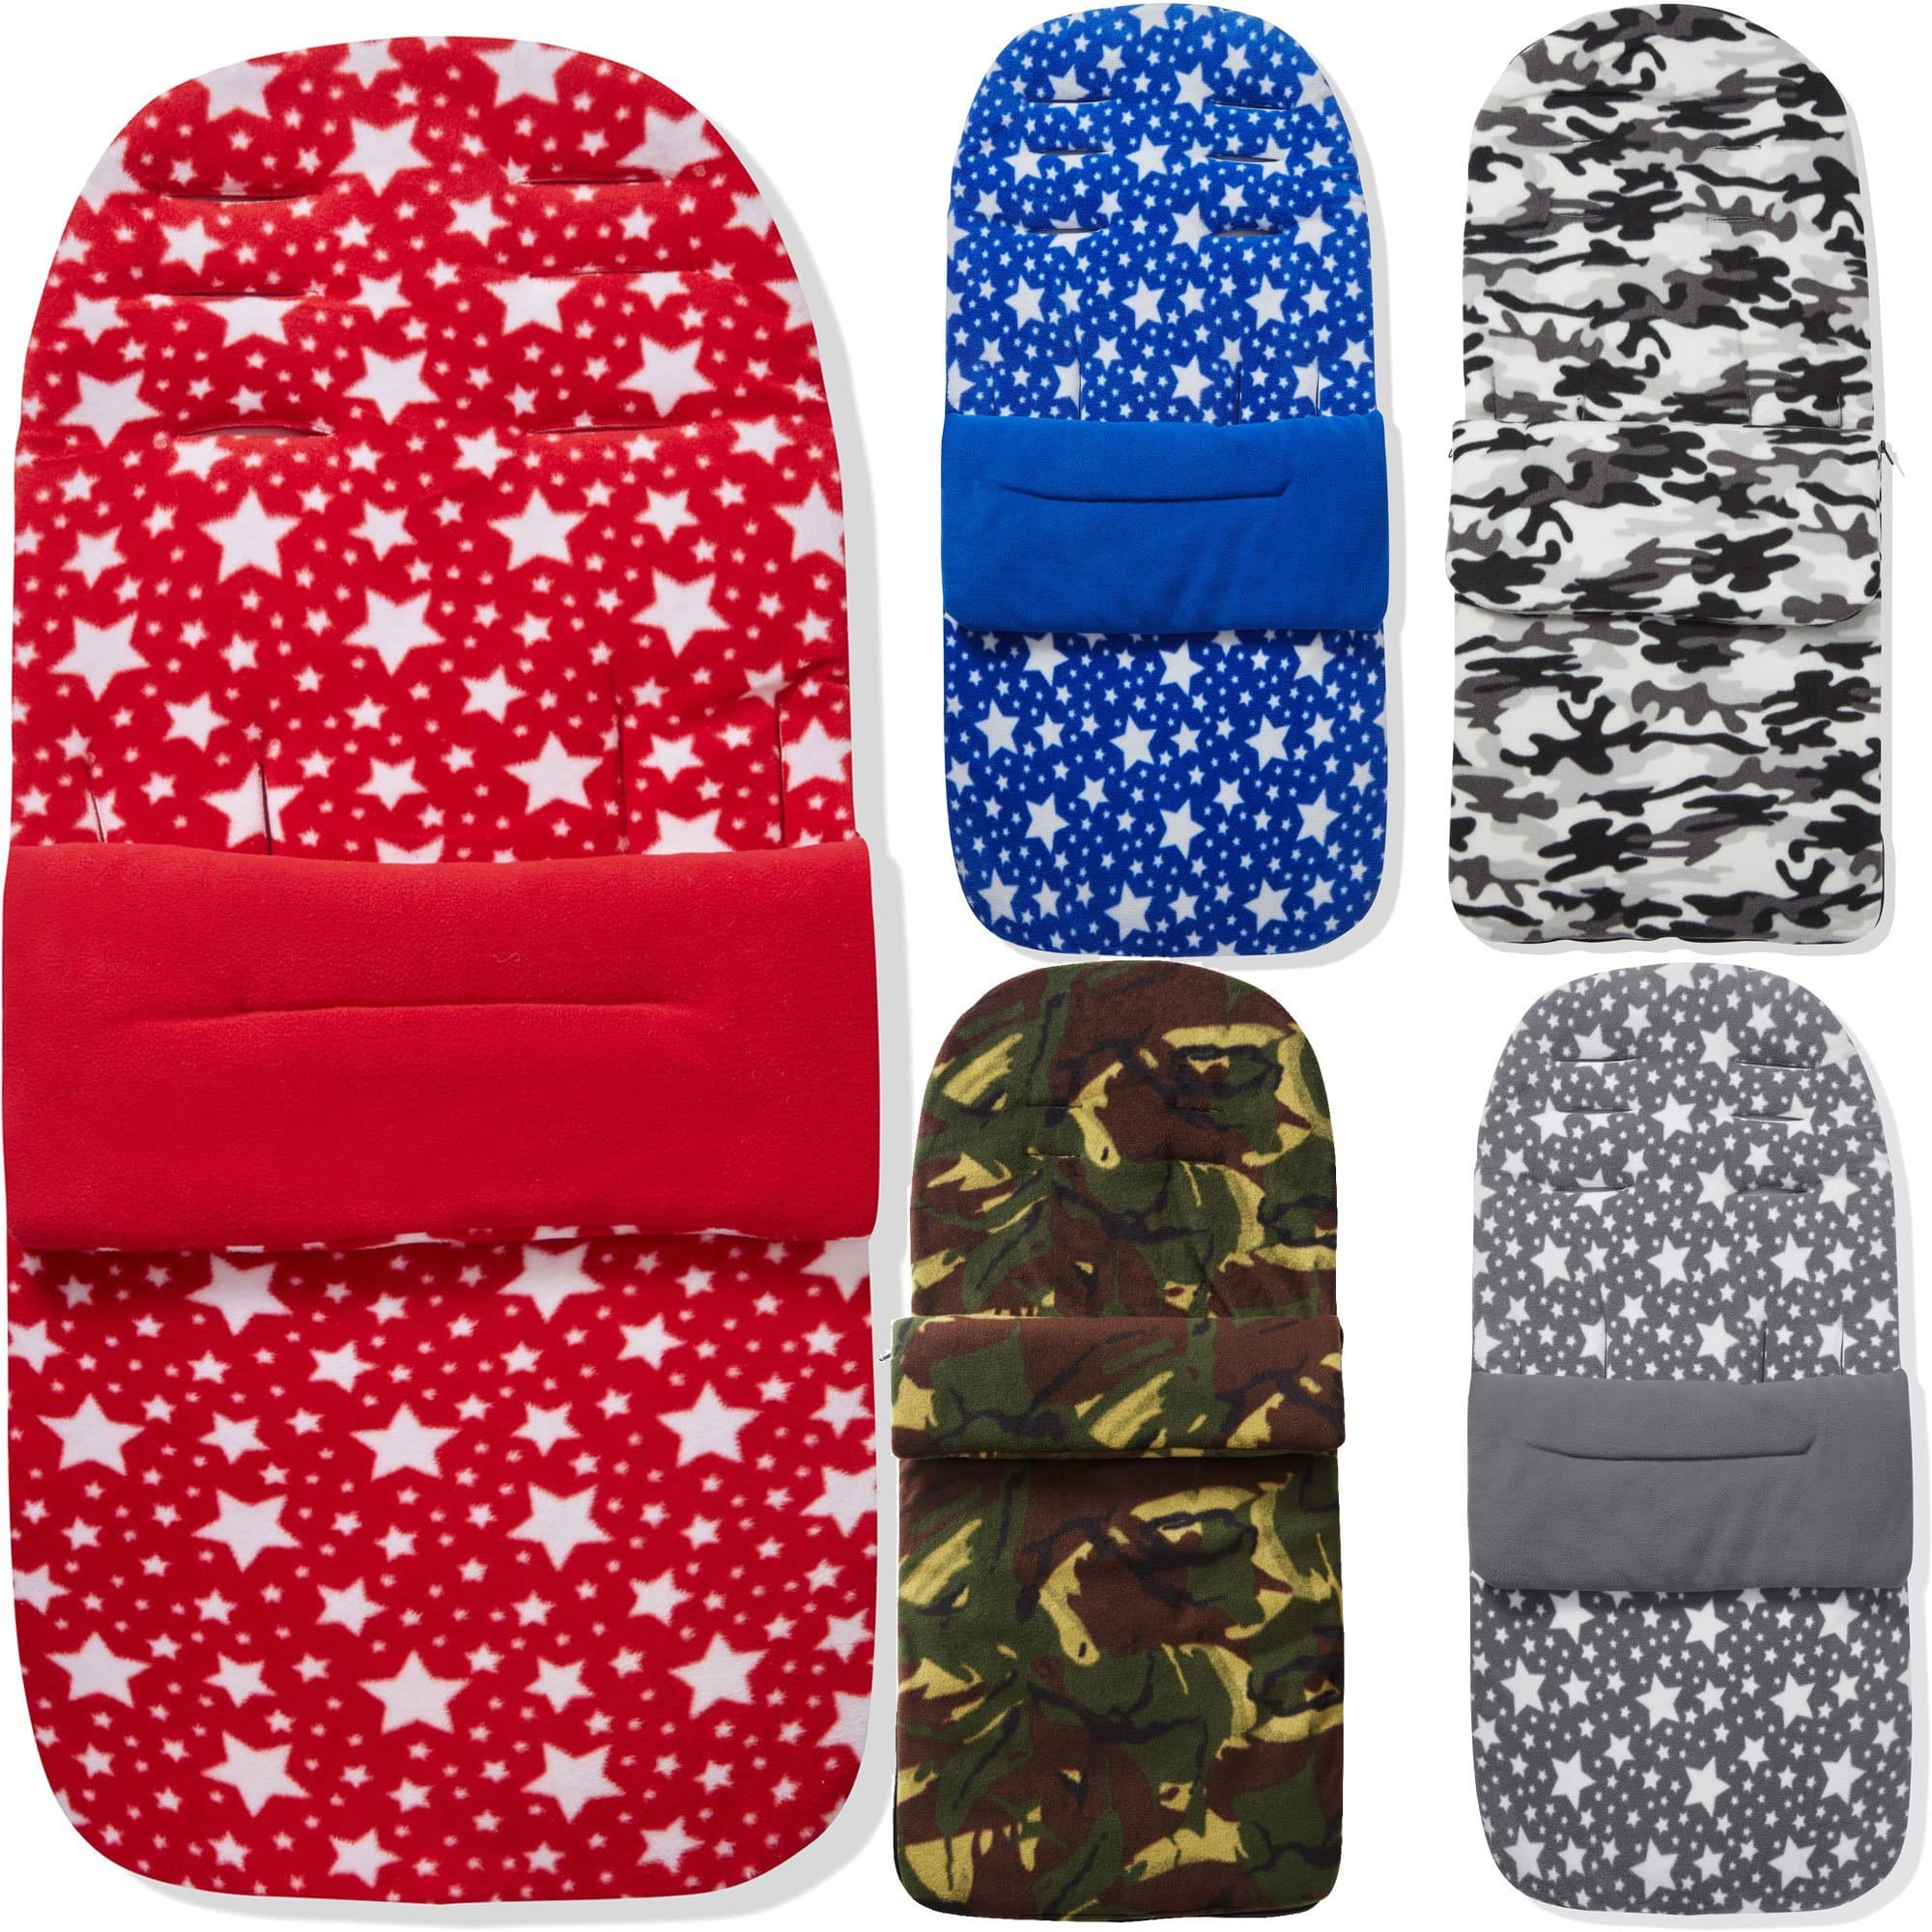 Fleece Footmuff / Cosy Toes Compatible with Babystyle - For Your Little One